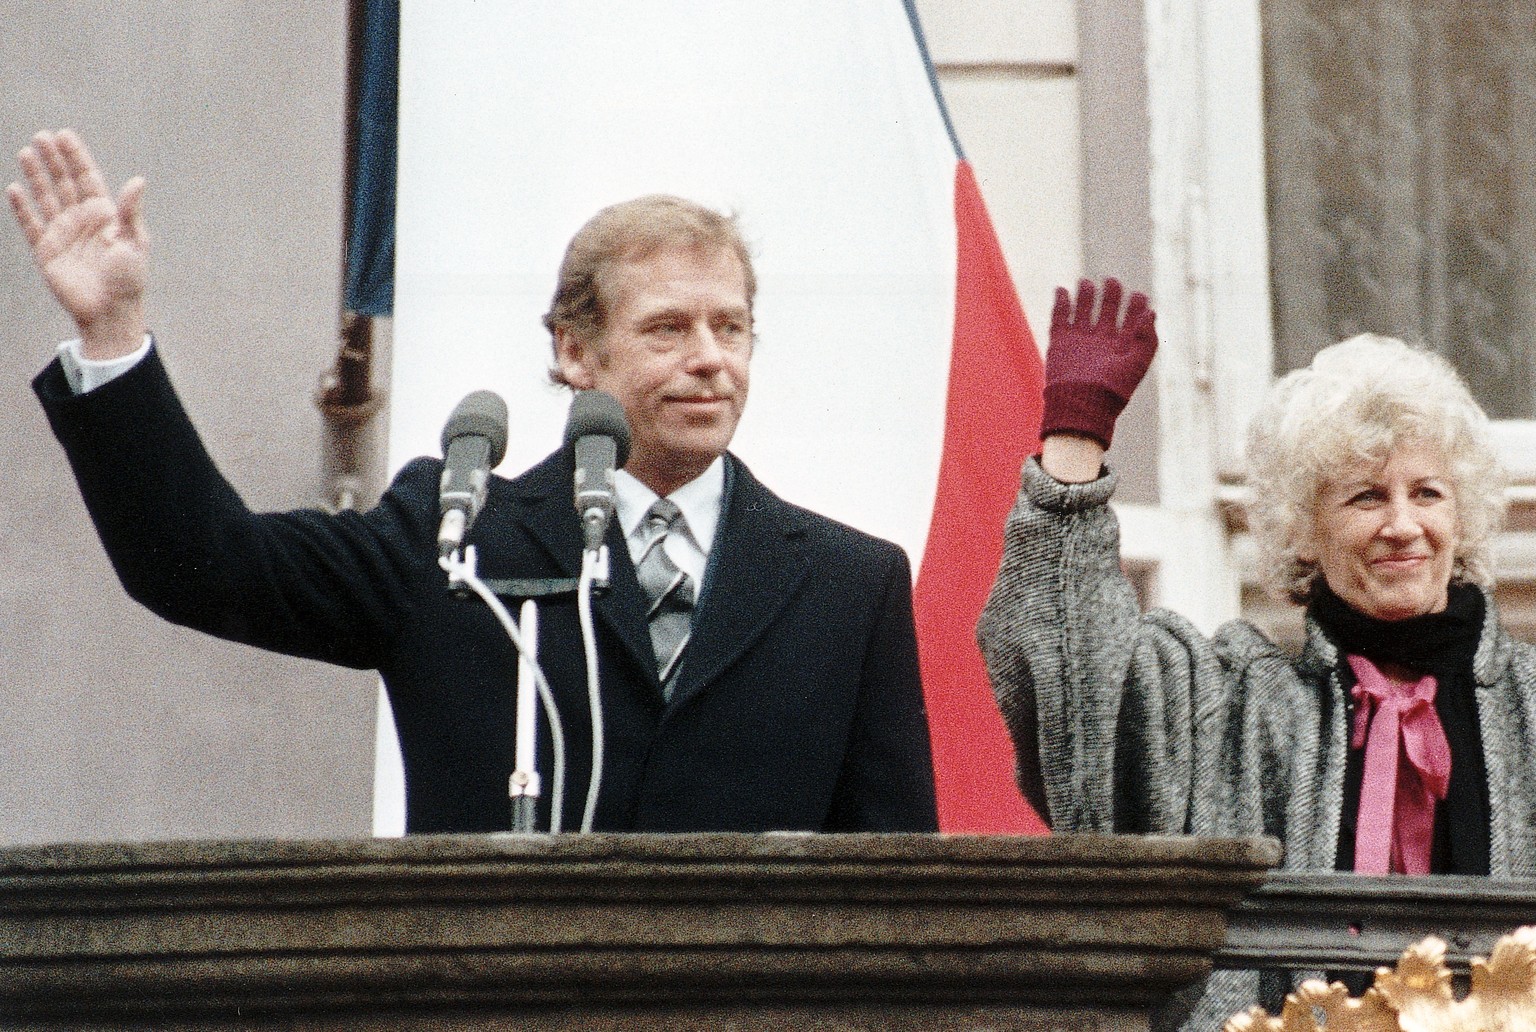 The new President of Czechoslovakia, Vaclav Havel, and his wife, Olga, meet Prague citizens after being elected at the Prague Castle, December 29, 1989.
REUTERS/Staff - RTR1PSSL